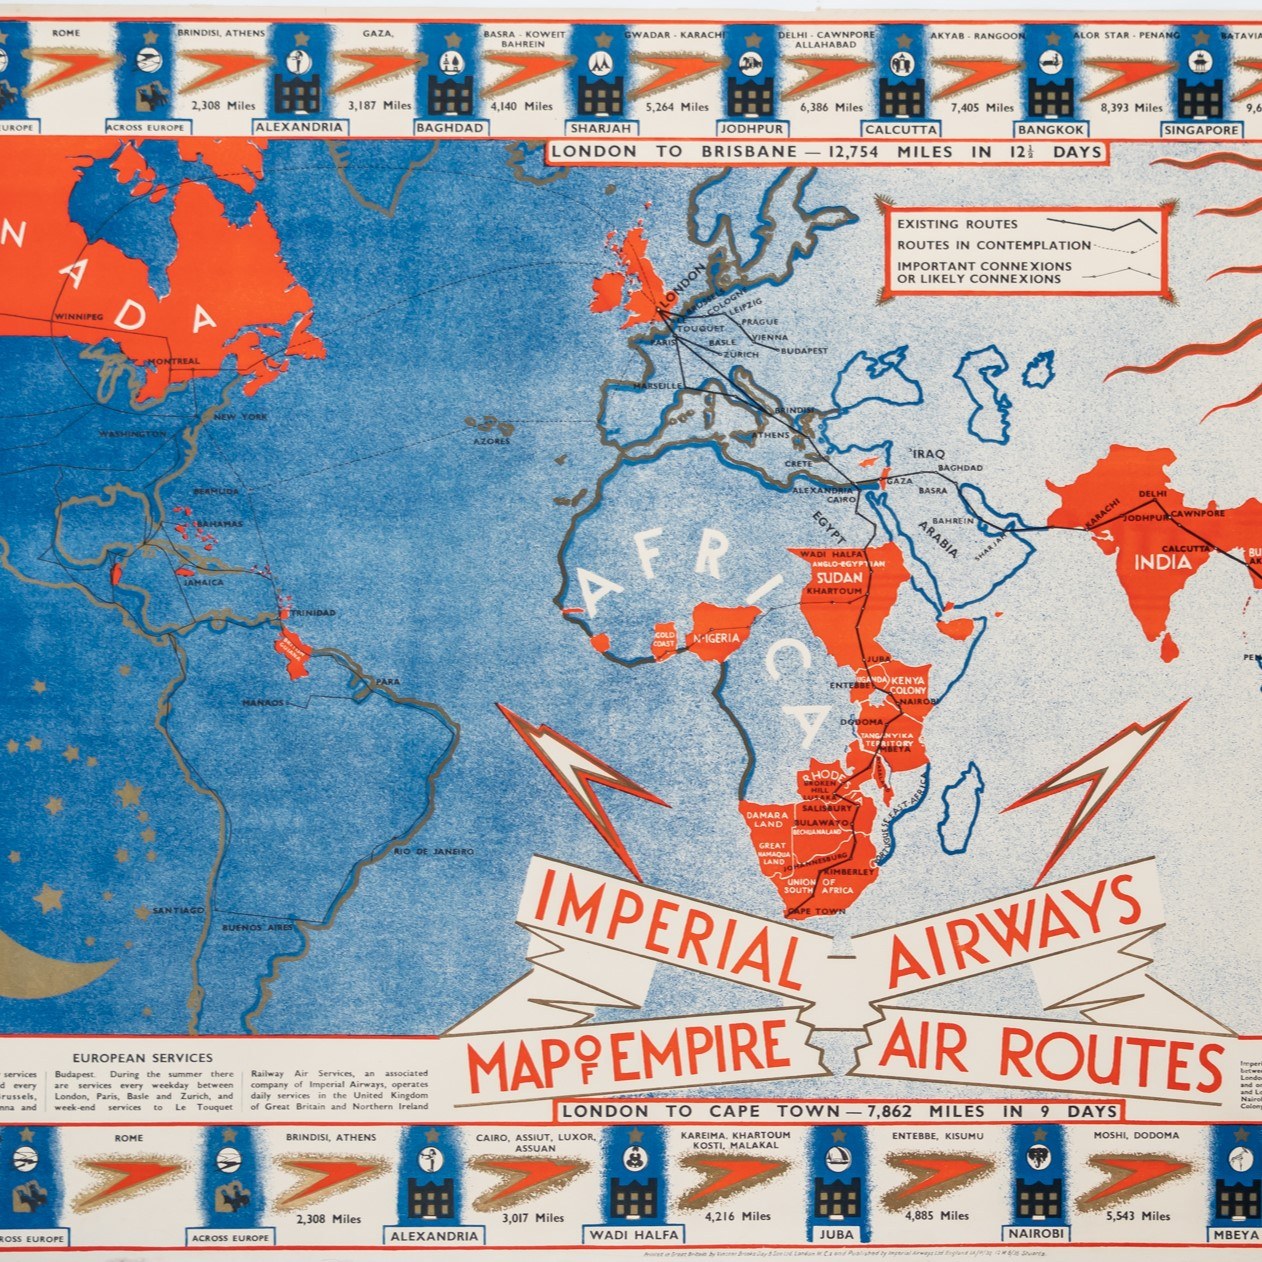 IMPERIAL AIRWAYS, MAP OF EMPIRE POSTER BY LÁSZLÓ MOHOLY-NAGY